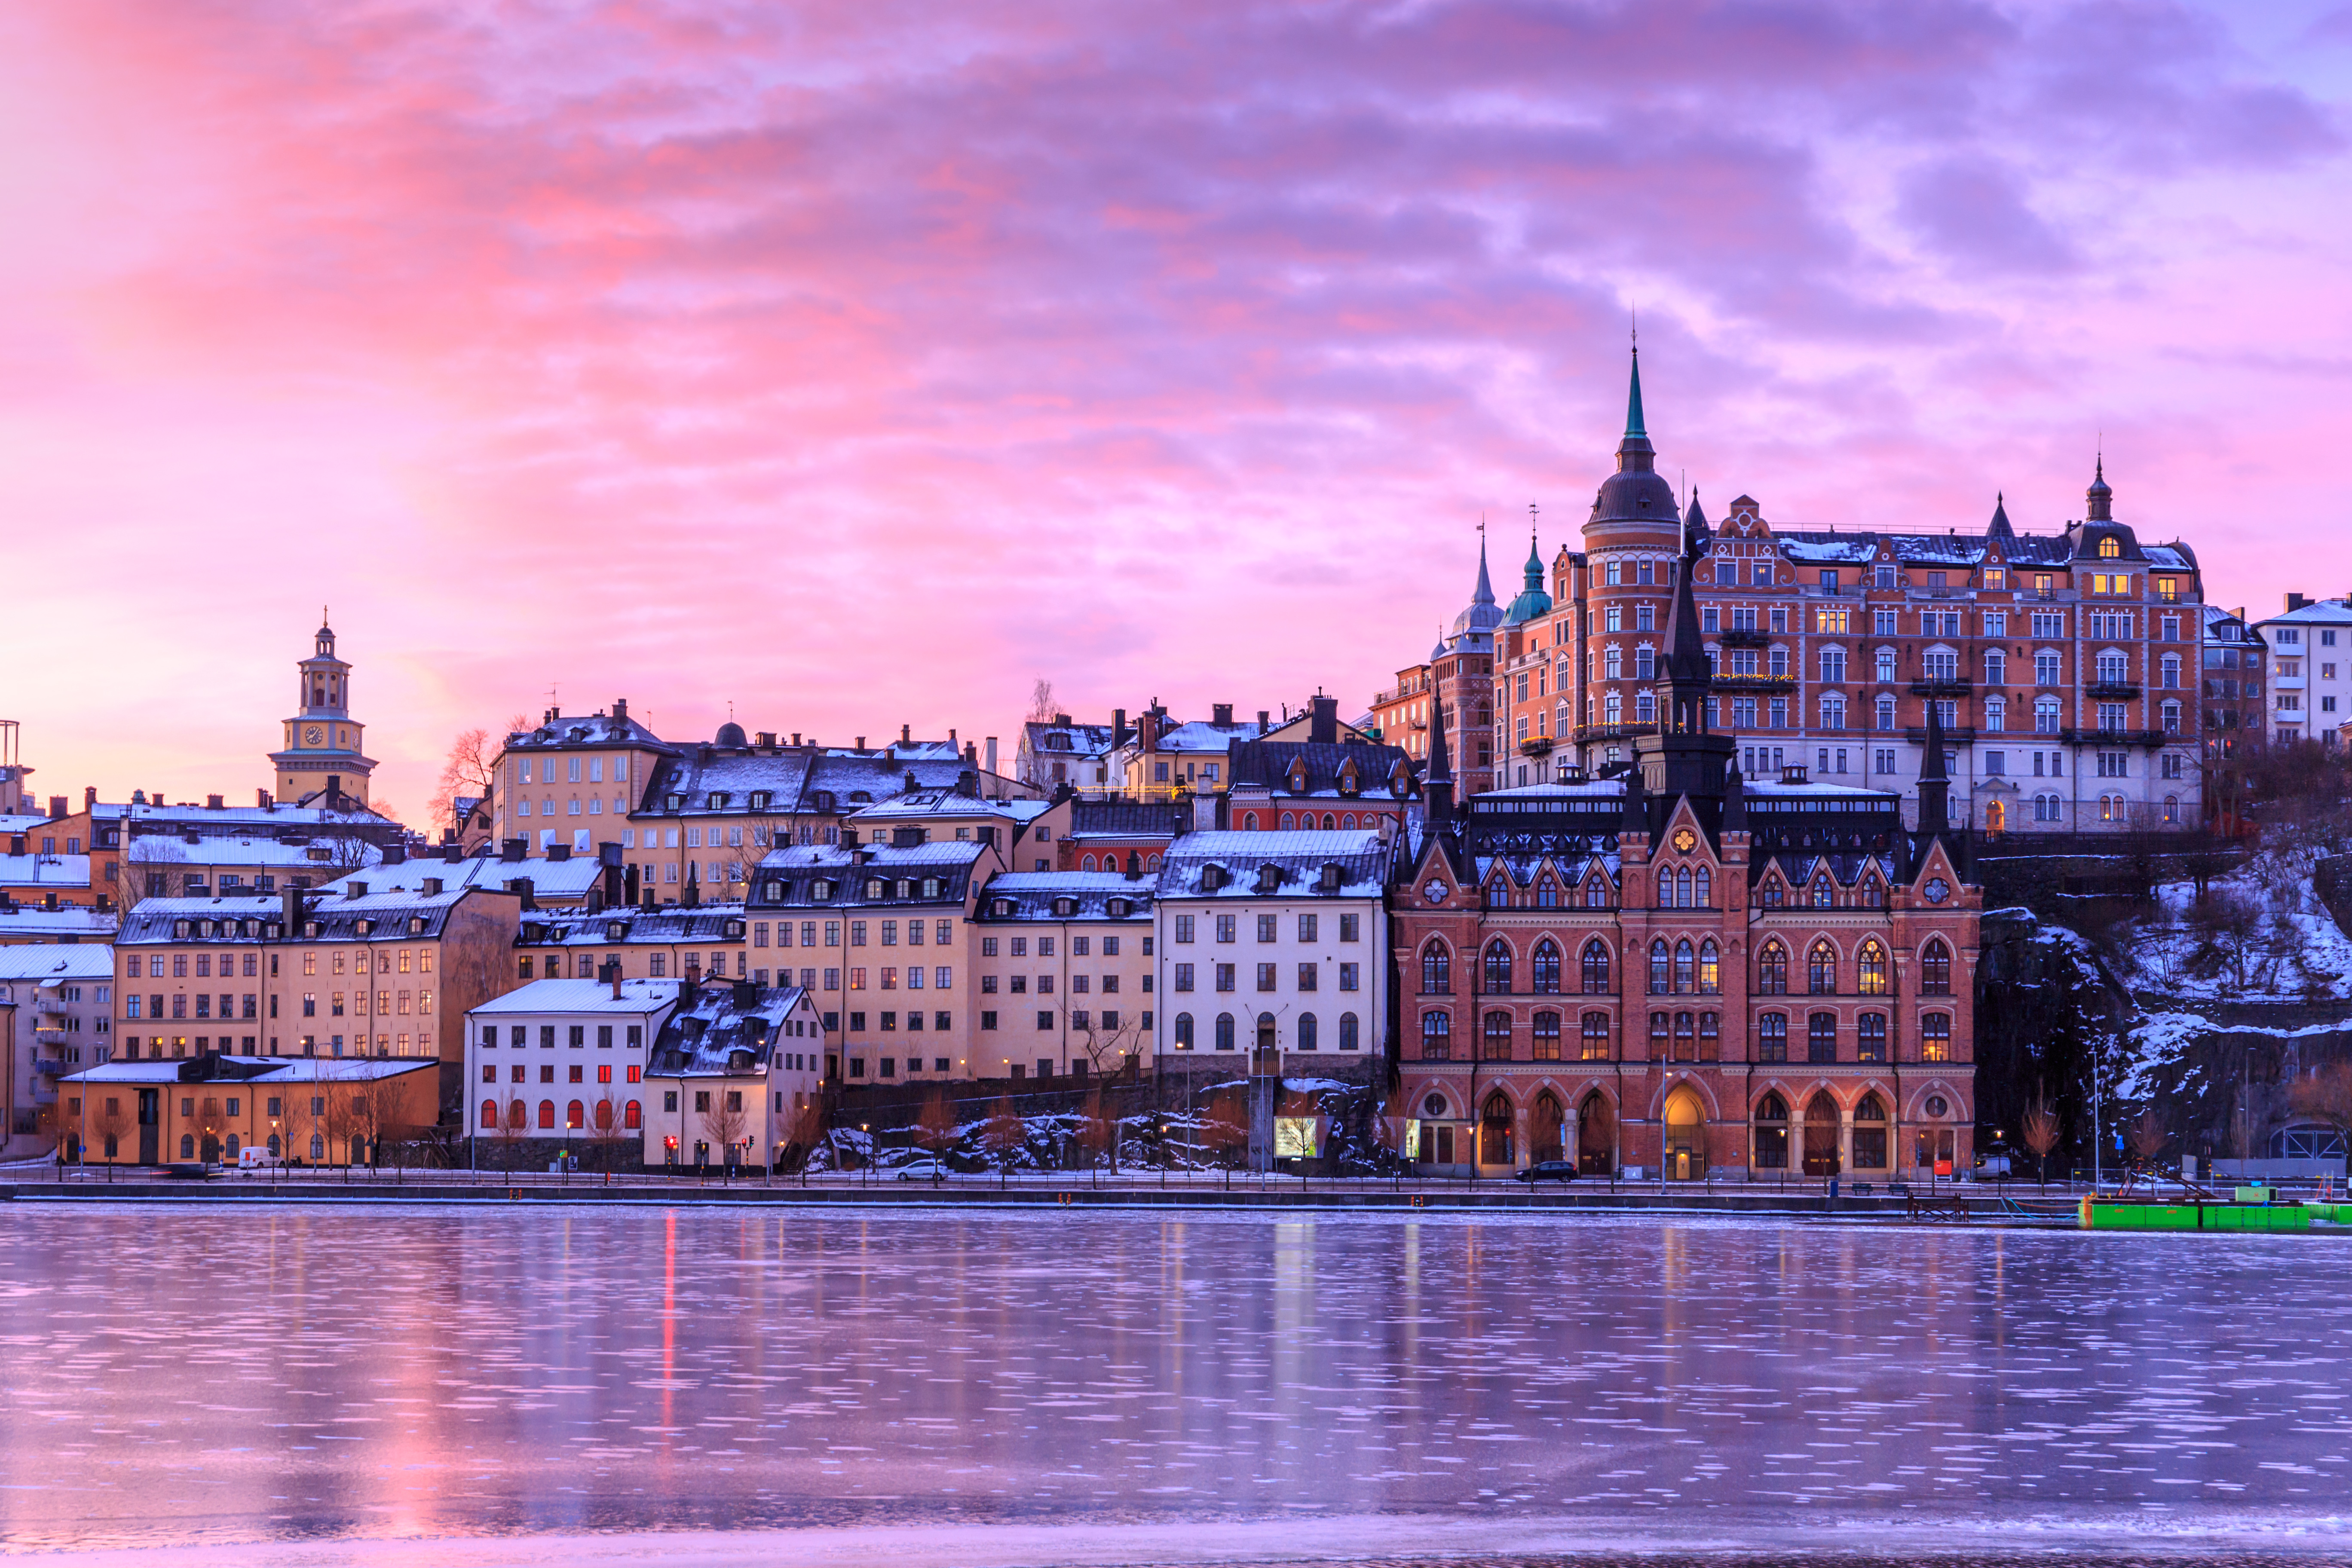 Photo of a Swedish city at sunset, with lights glowing in windows and reflecting into a fjord